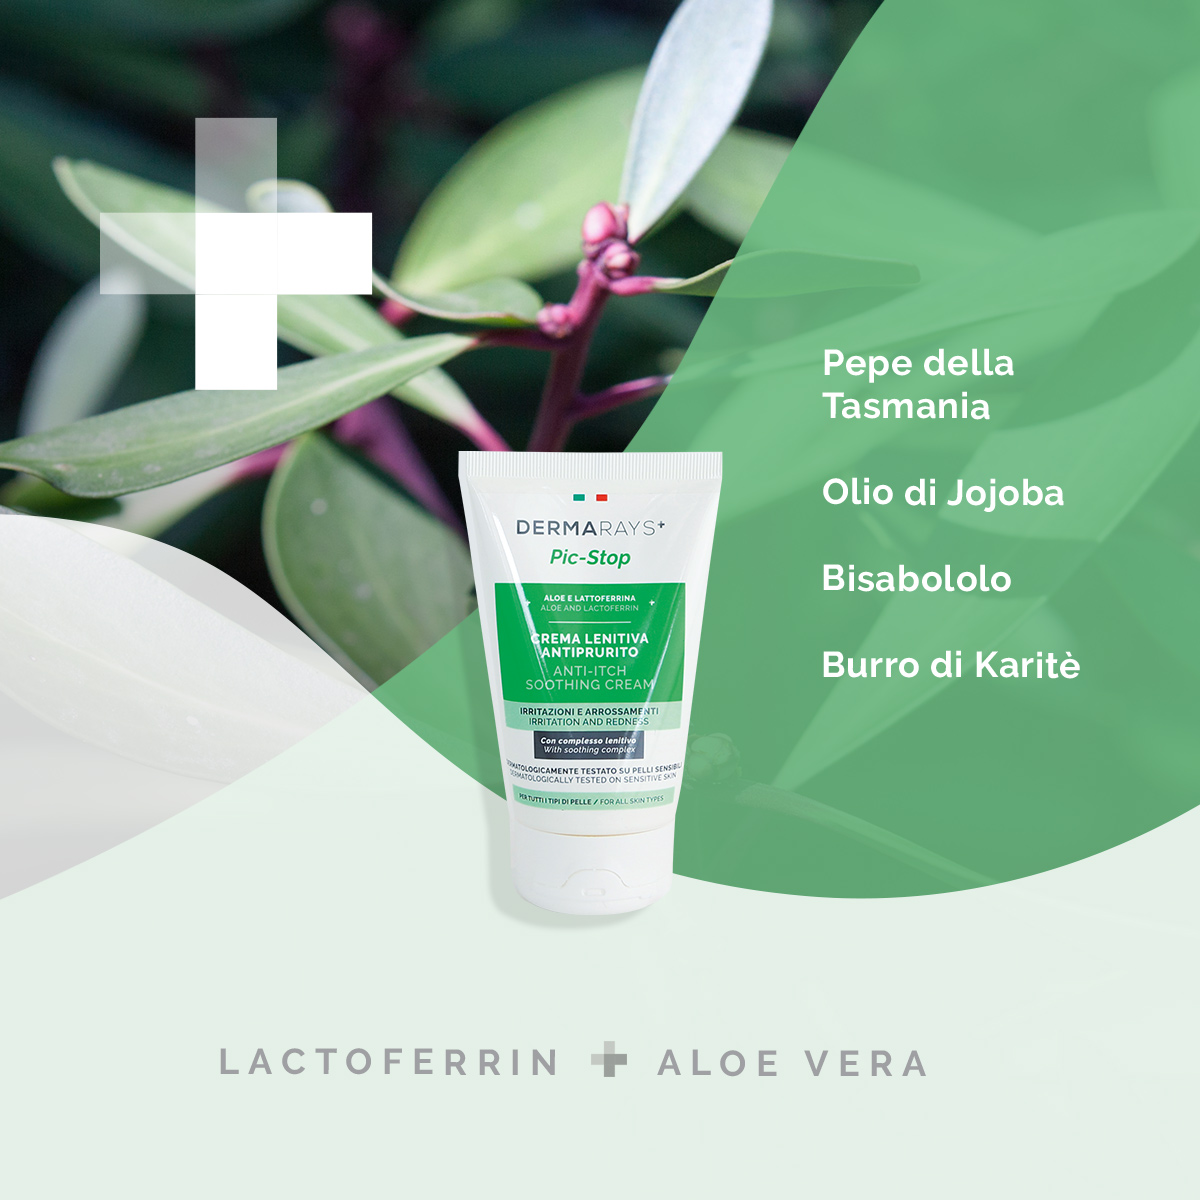 Anti itching lenitive cream  - Ingredients and properties